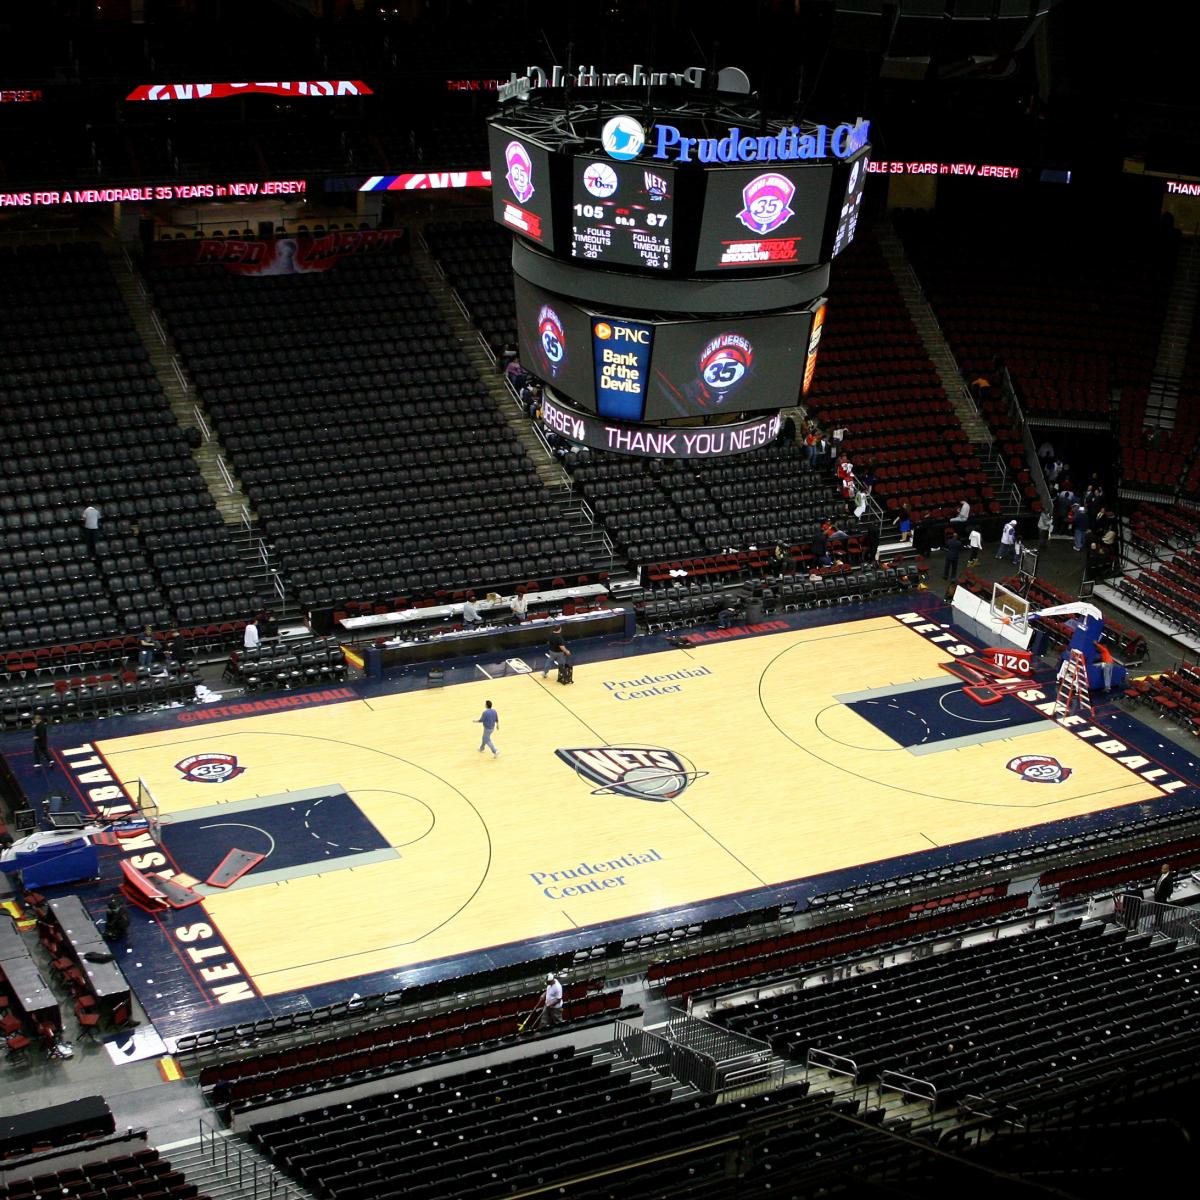 Tickets to New Jersey Nets at Prudential Center